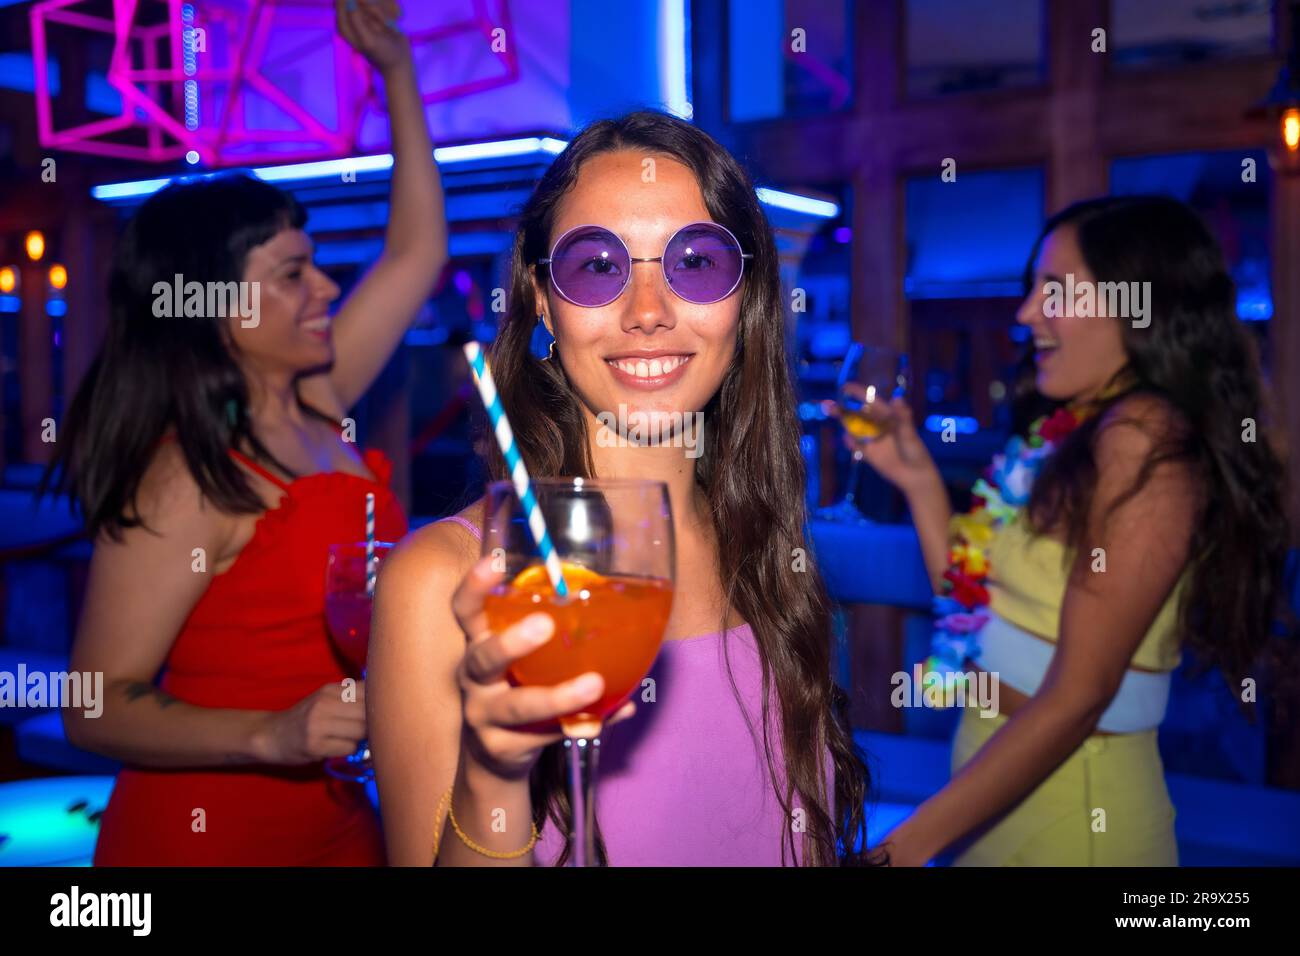 Portrait attractive woman toasting and having fun with a glass of alcohol in a nightclub at a night party Stock Photo